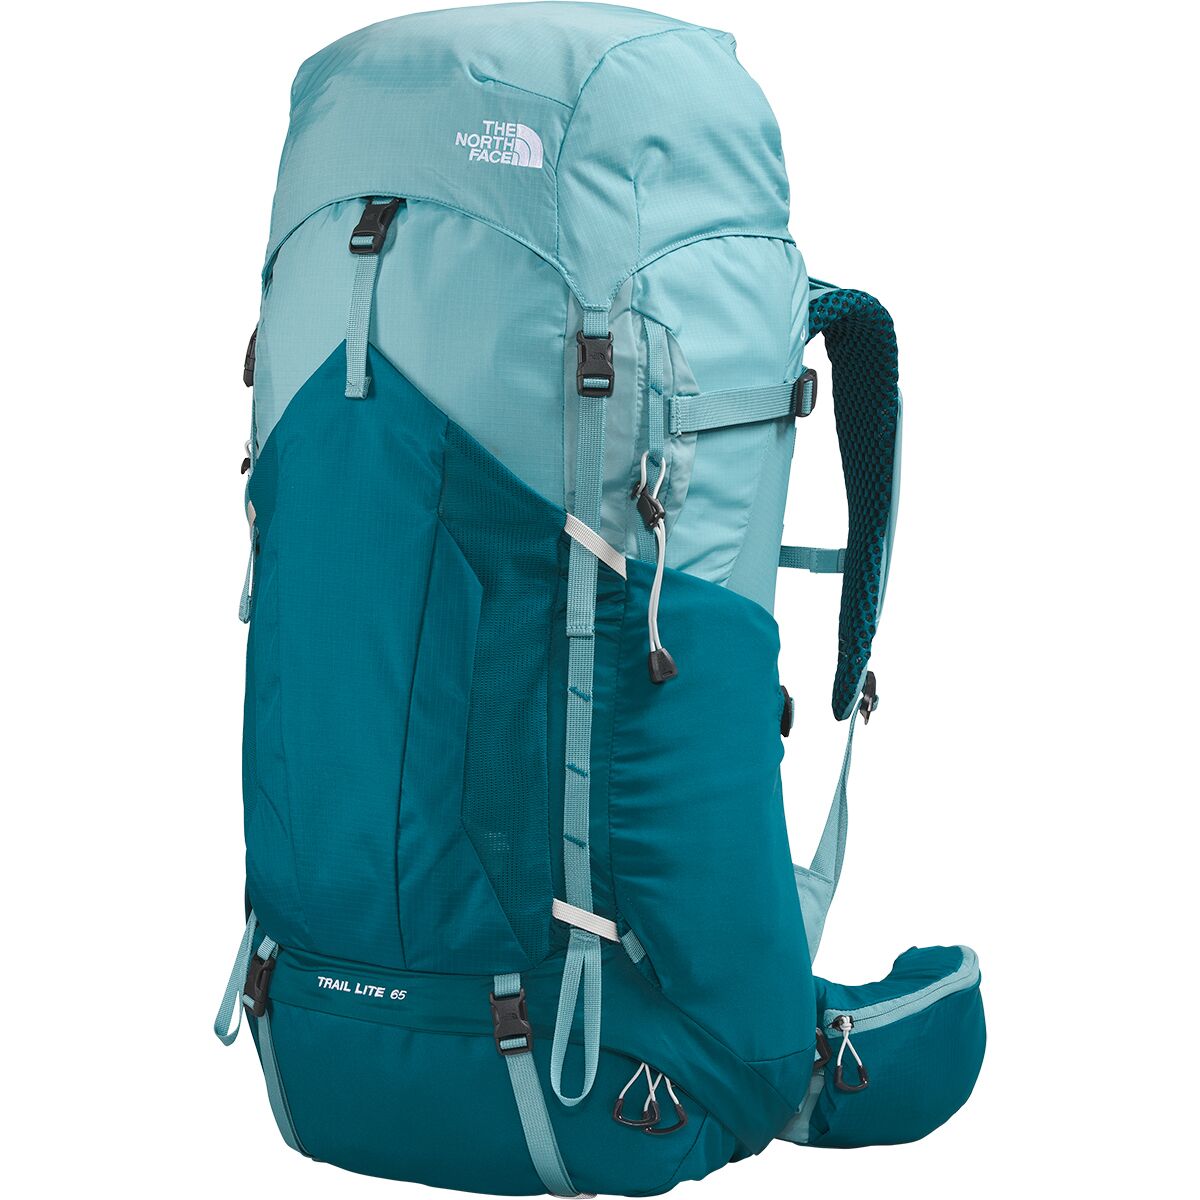 The North Face Women's Trail Lite 65L Backpack - Women's